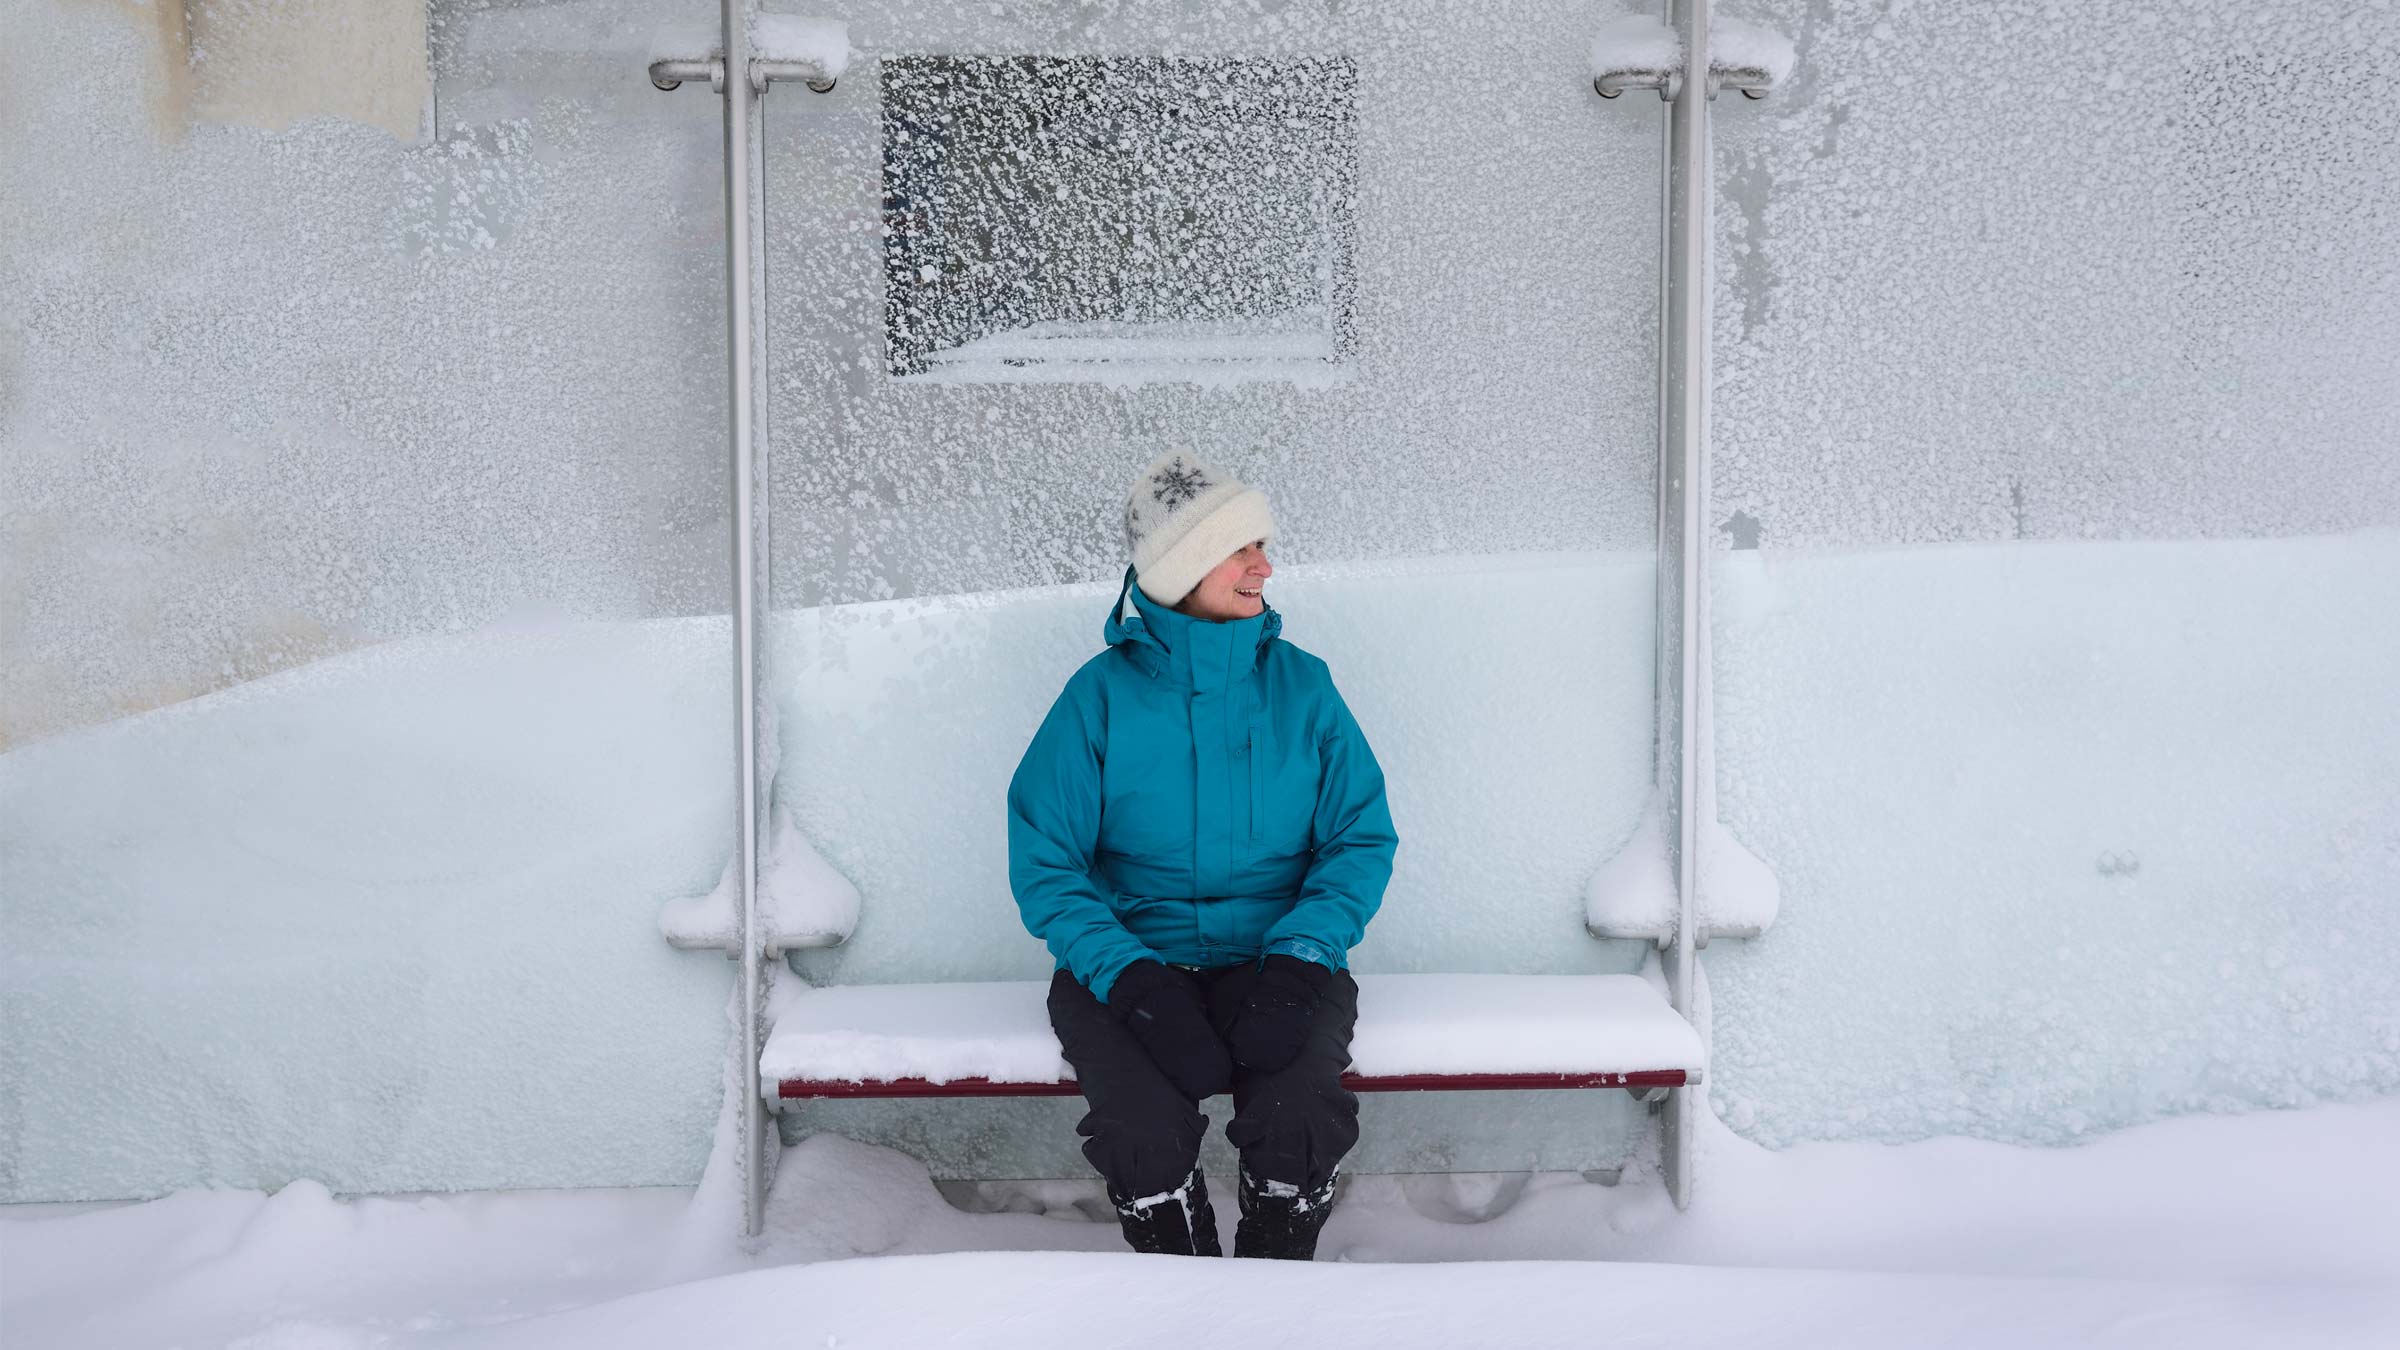 How to stay warm in the cold: Tips from an emergency medicine and survival expert